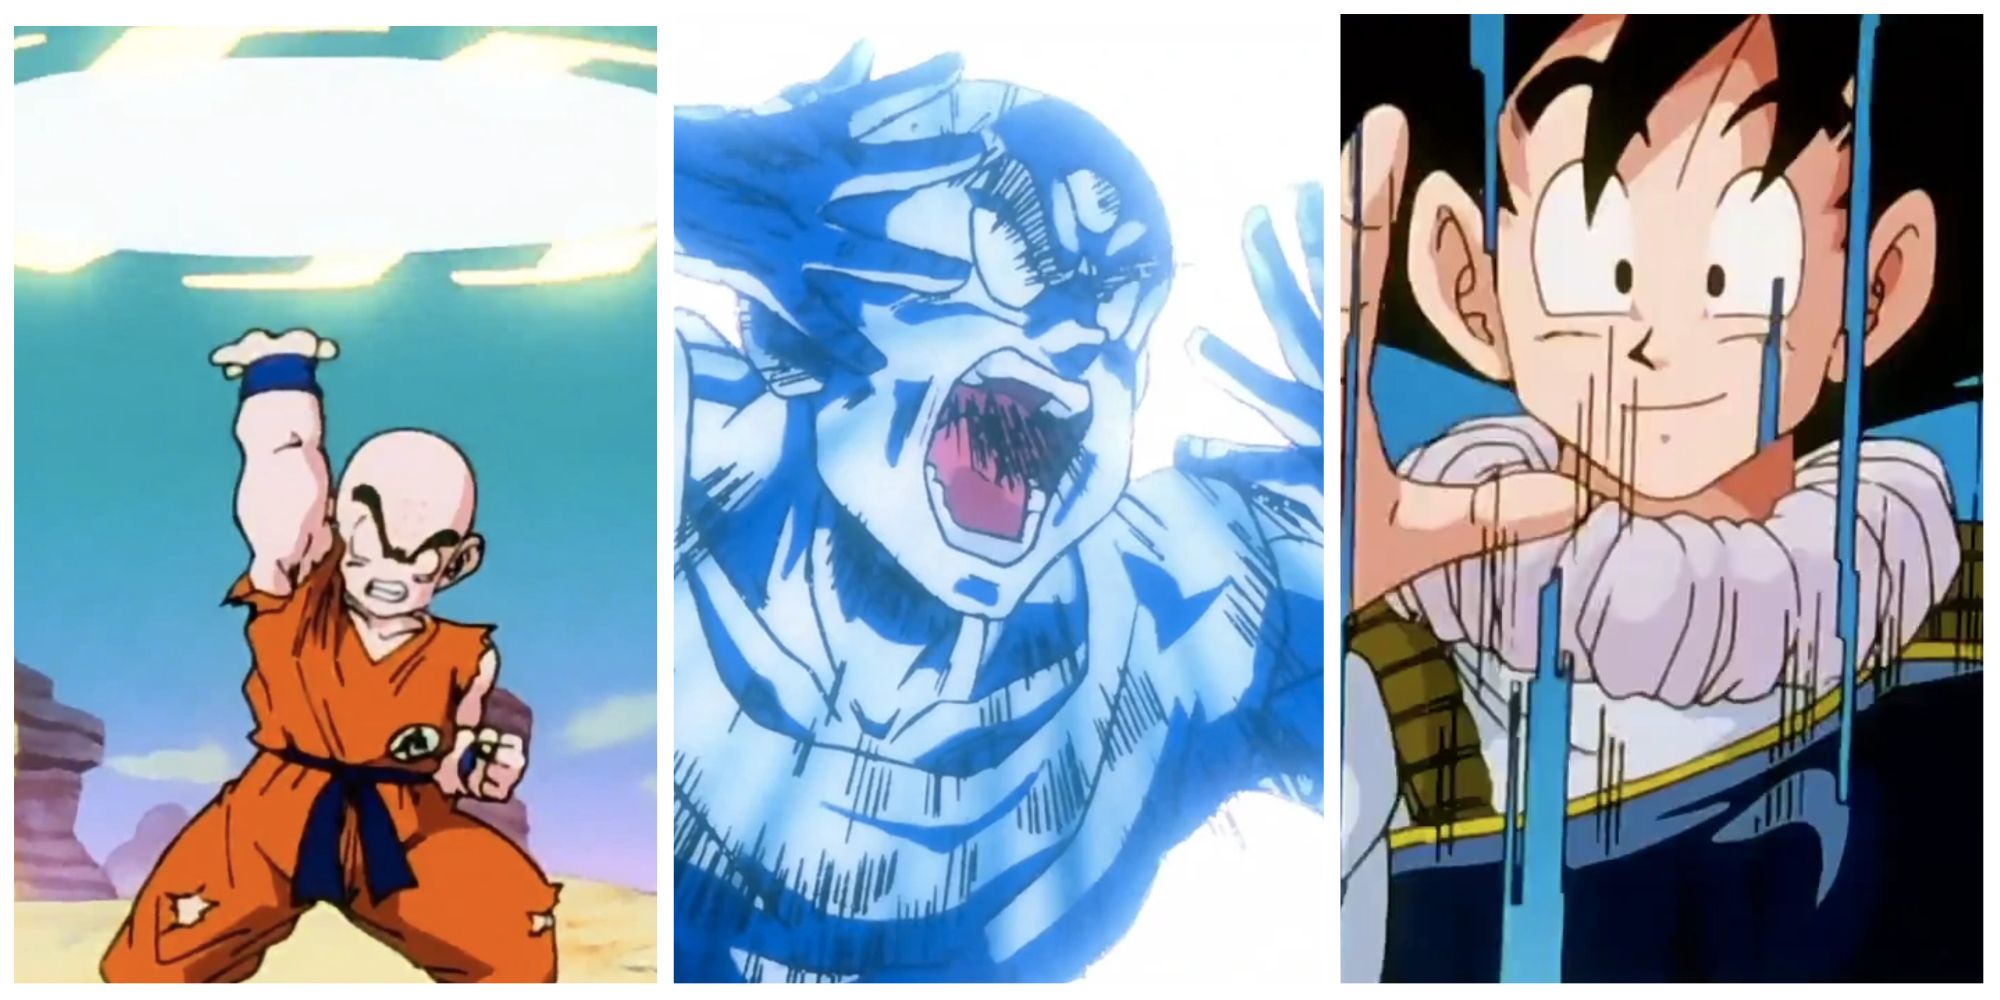 What do you consider to be Vegeta's signature move of these three